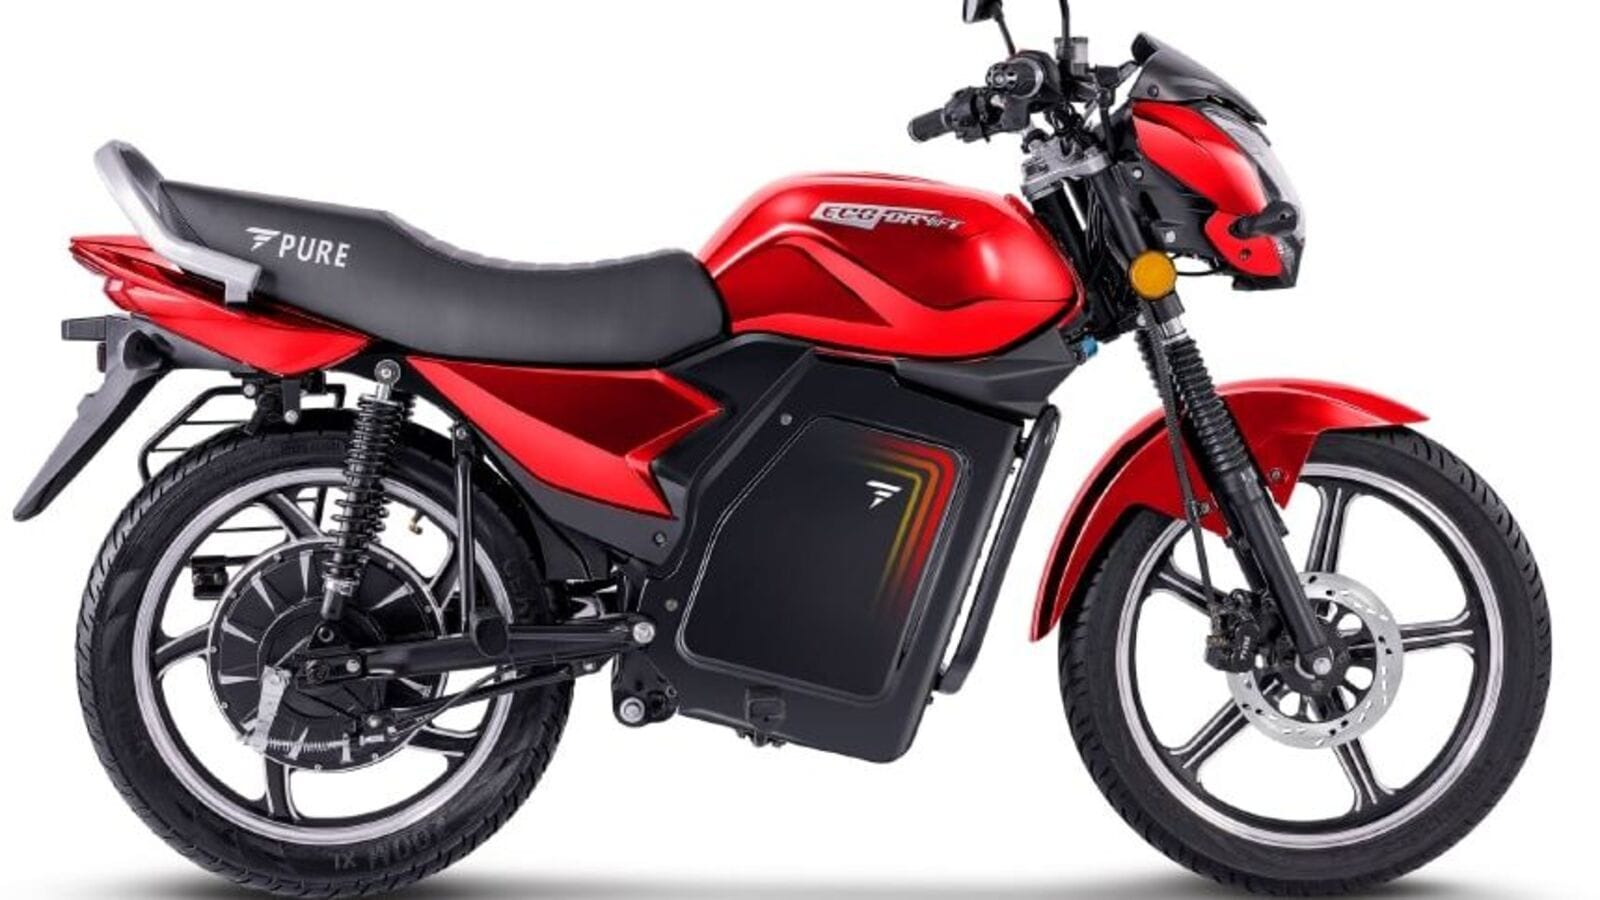 This is the most affordable electric motorcycle in India at Rs 99,999